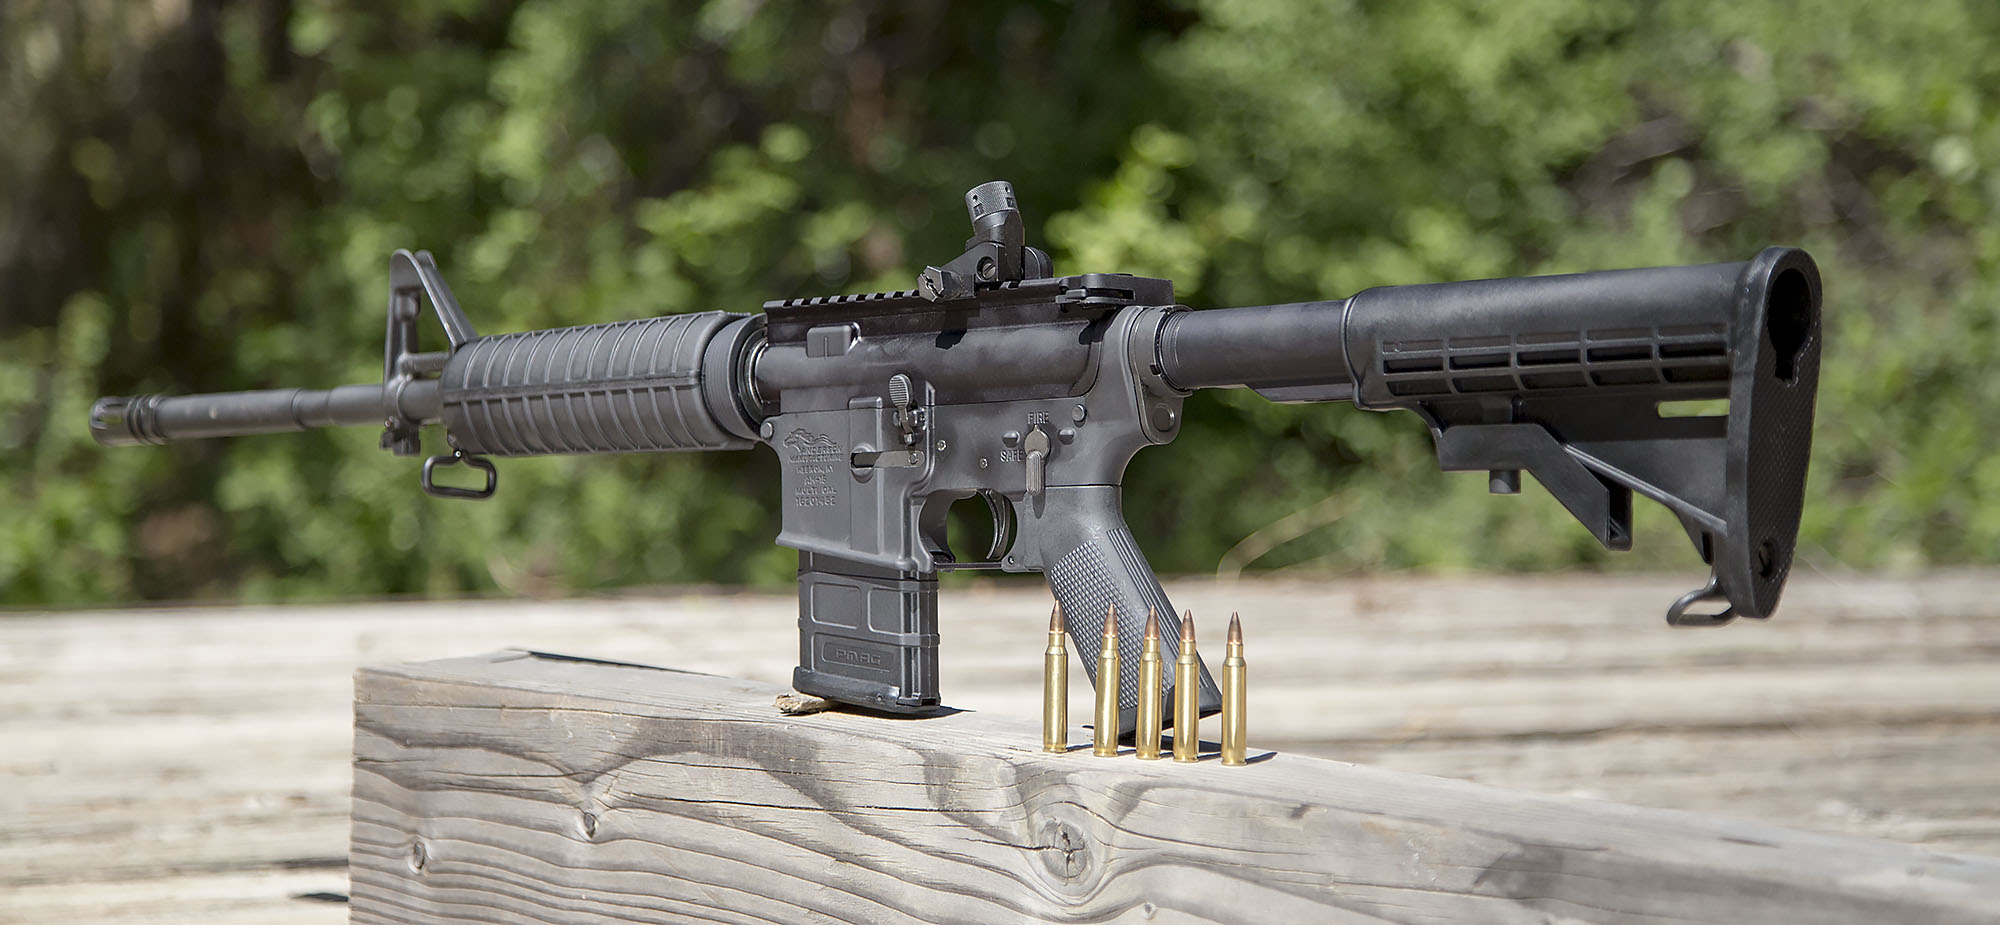 Seven Minute Del-Ton AR-15 Kit Build Step-By-Step.